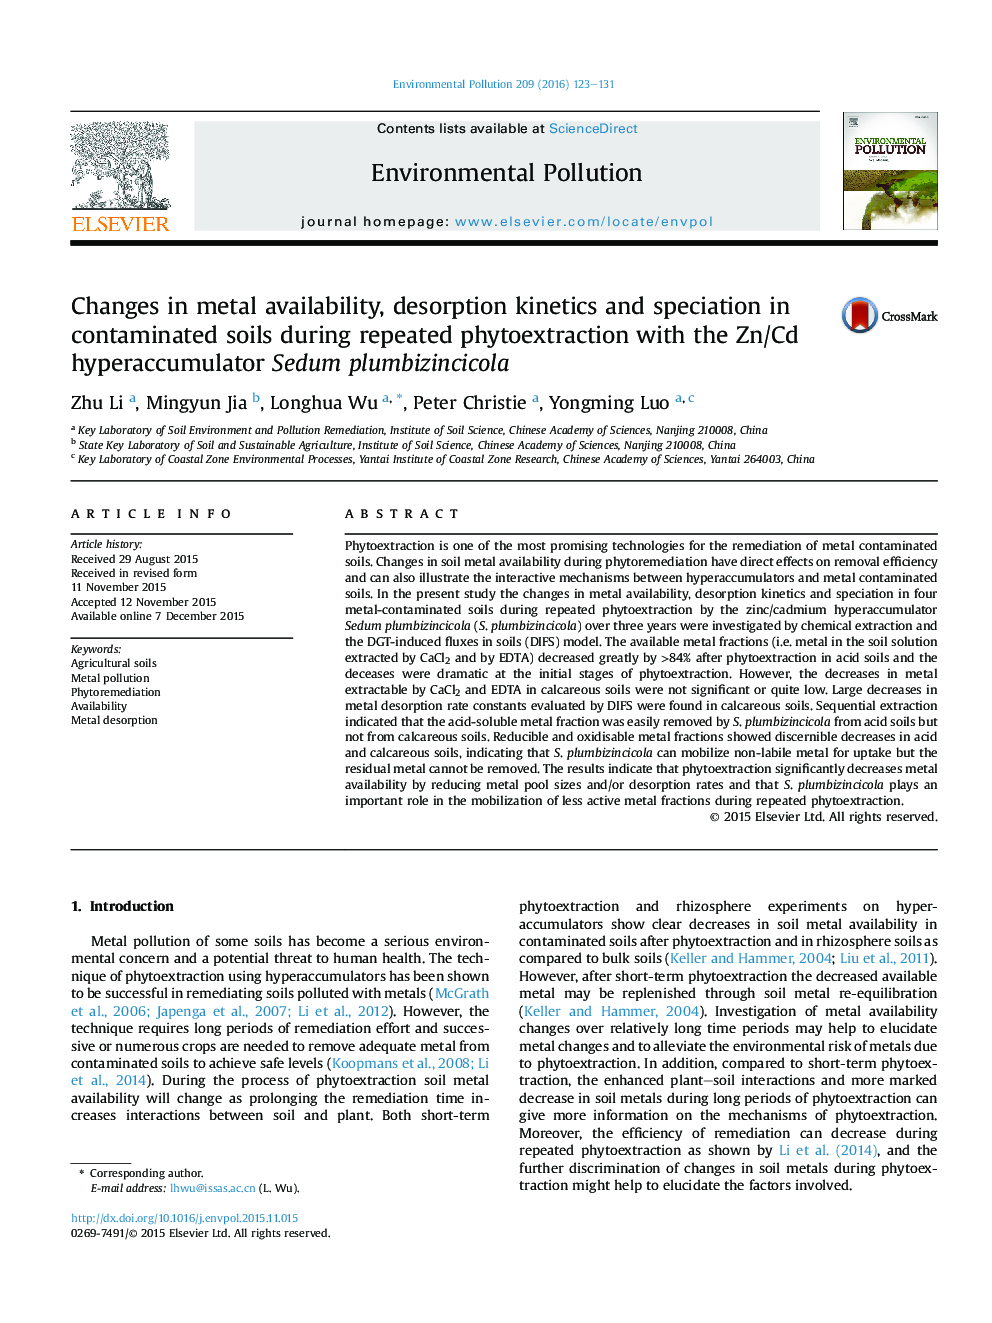 Changes in metal availability, desorption kinetics and speciation in contaminated soils during repeated phytoextraction with the Zn/Cd hyperaccumulator Sedum plumbizincicola